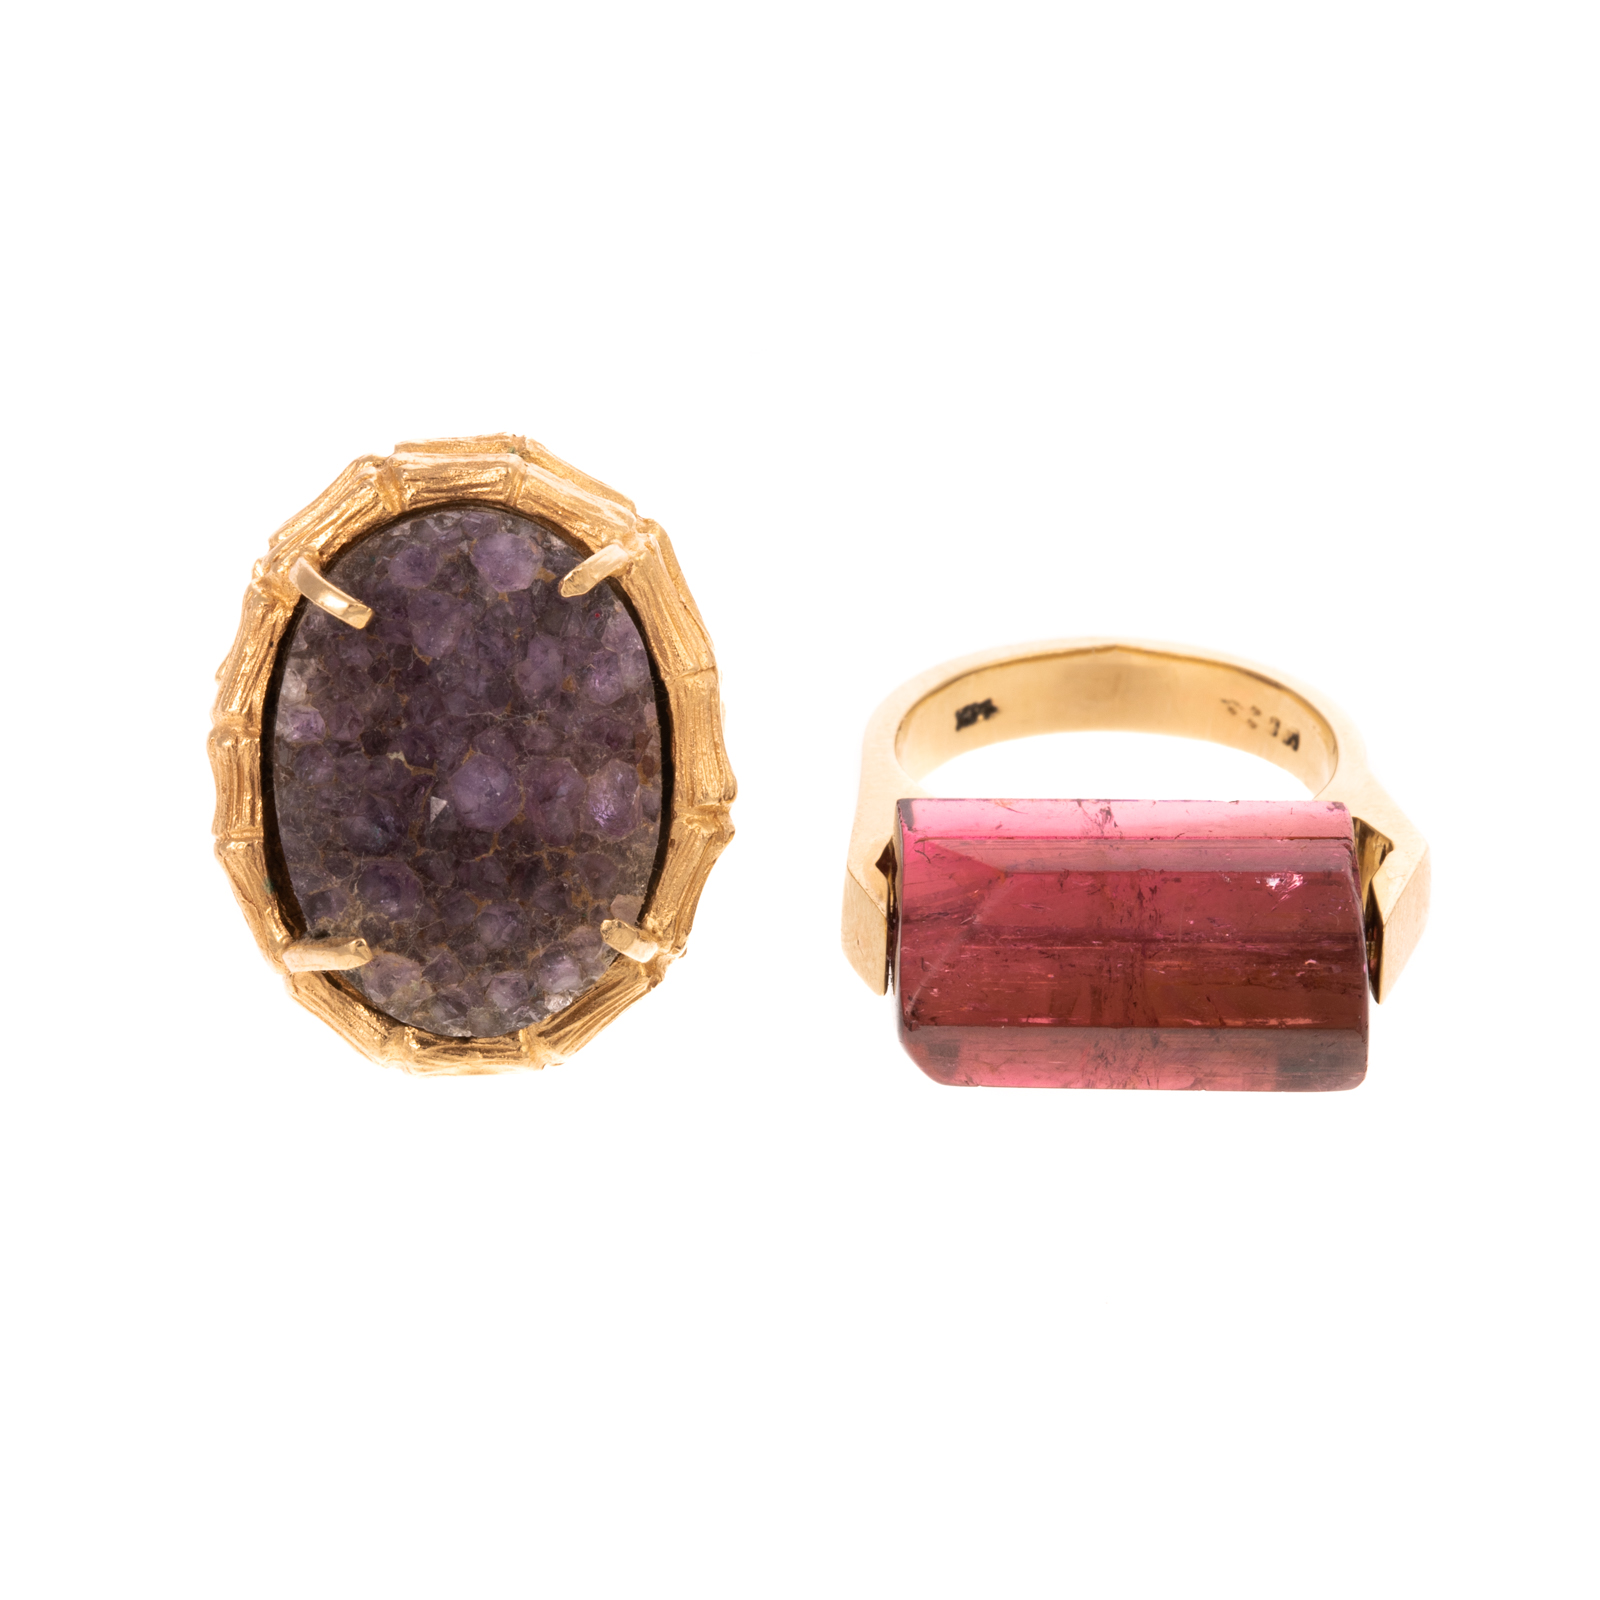 TWO NATURAL FORM GEMSTONE RINGS